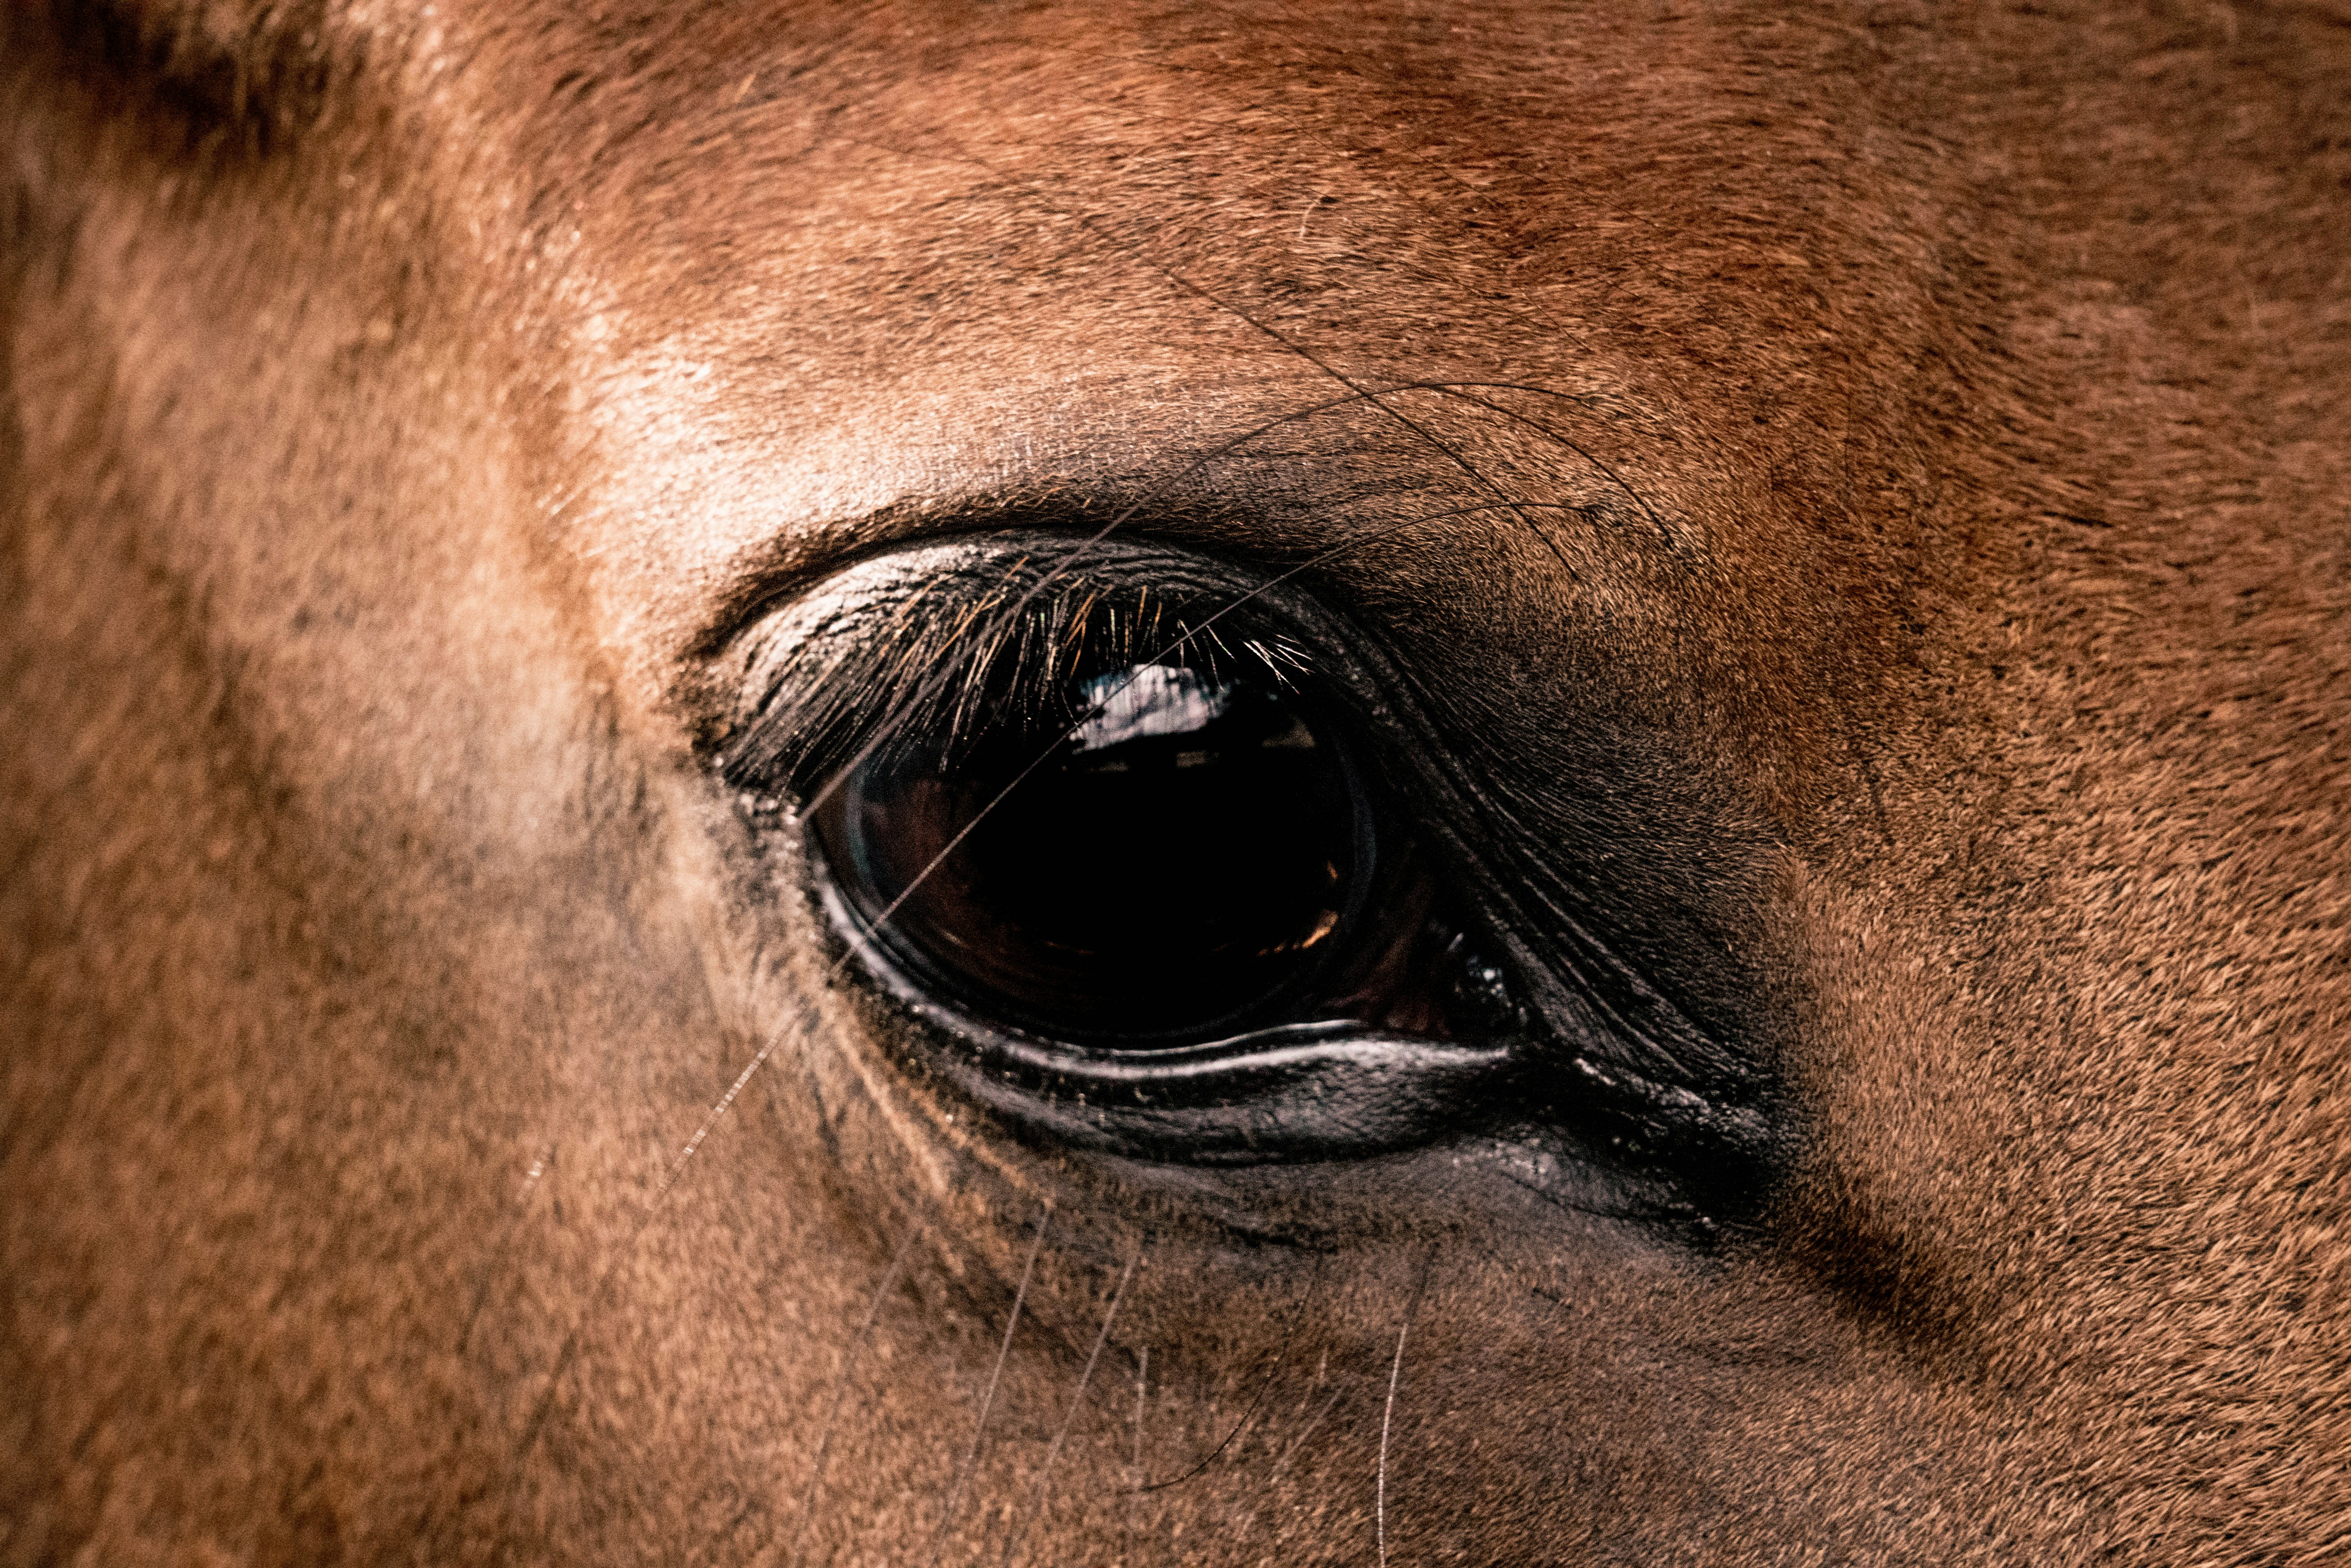 Arresting close-up of a brown horse's right eye